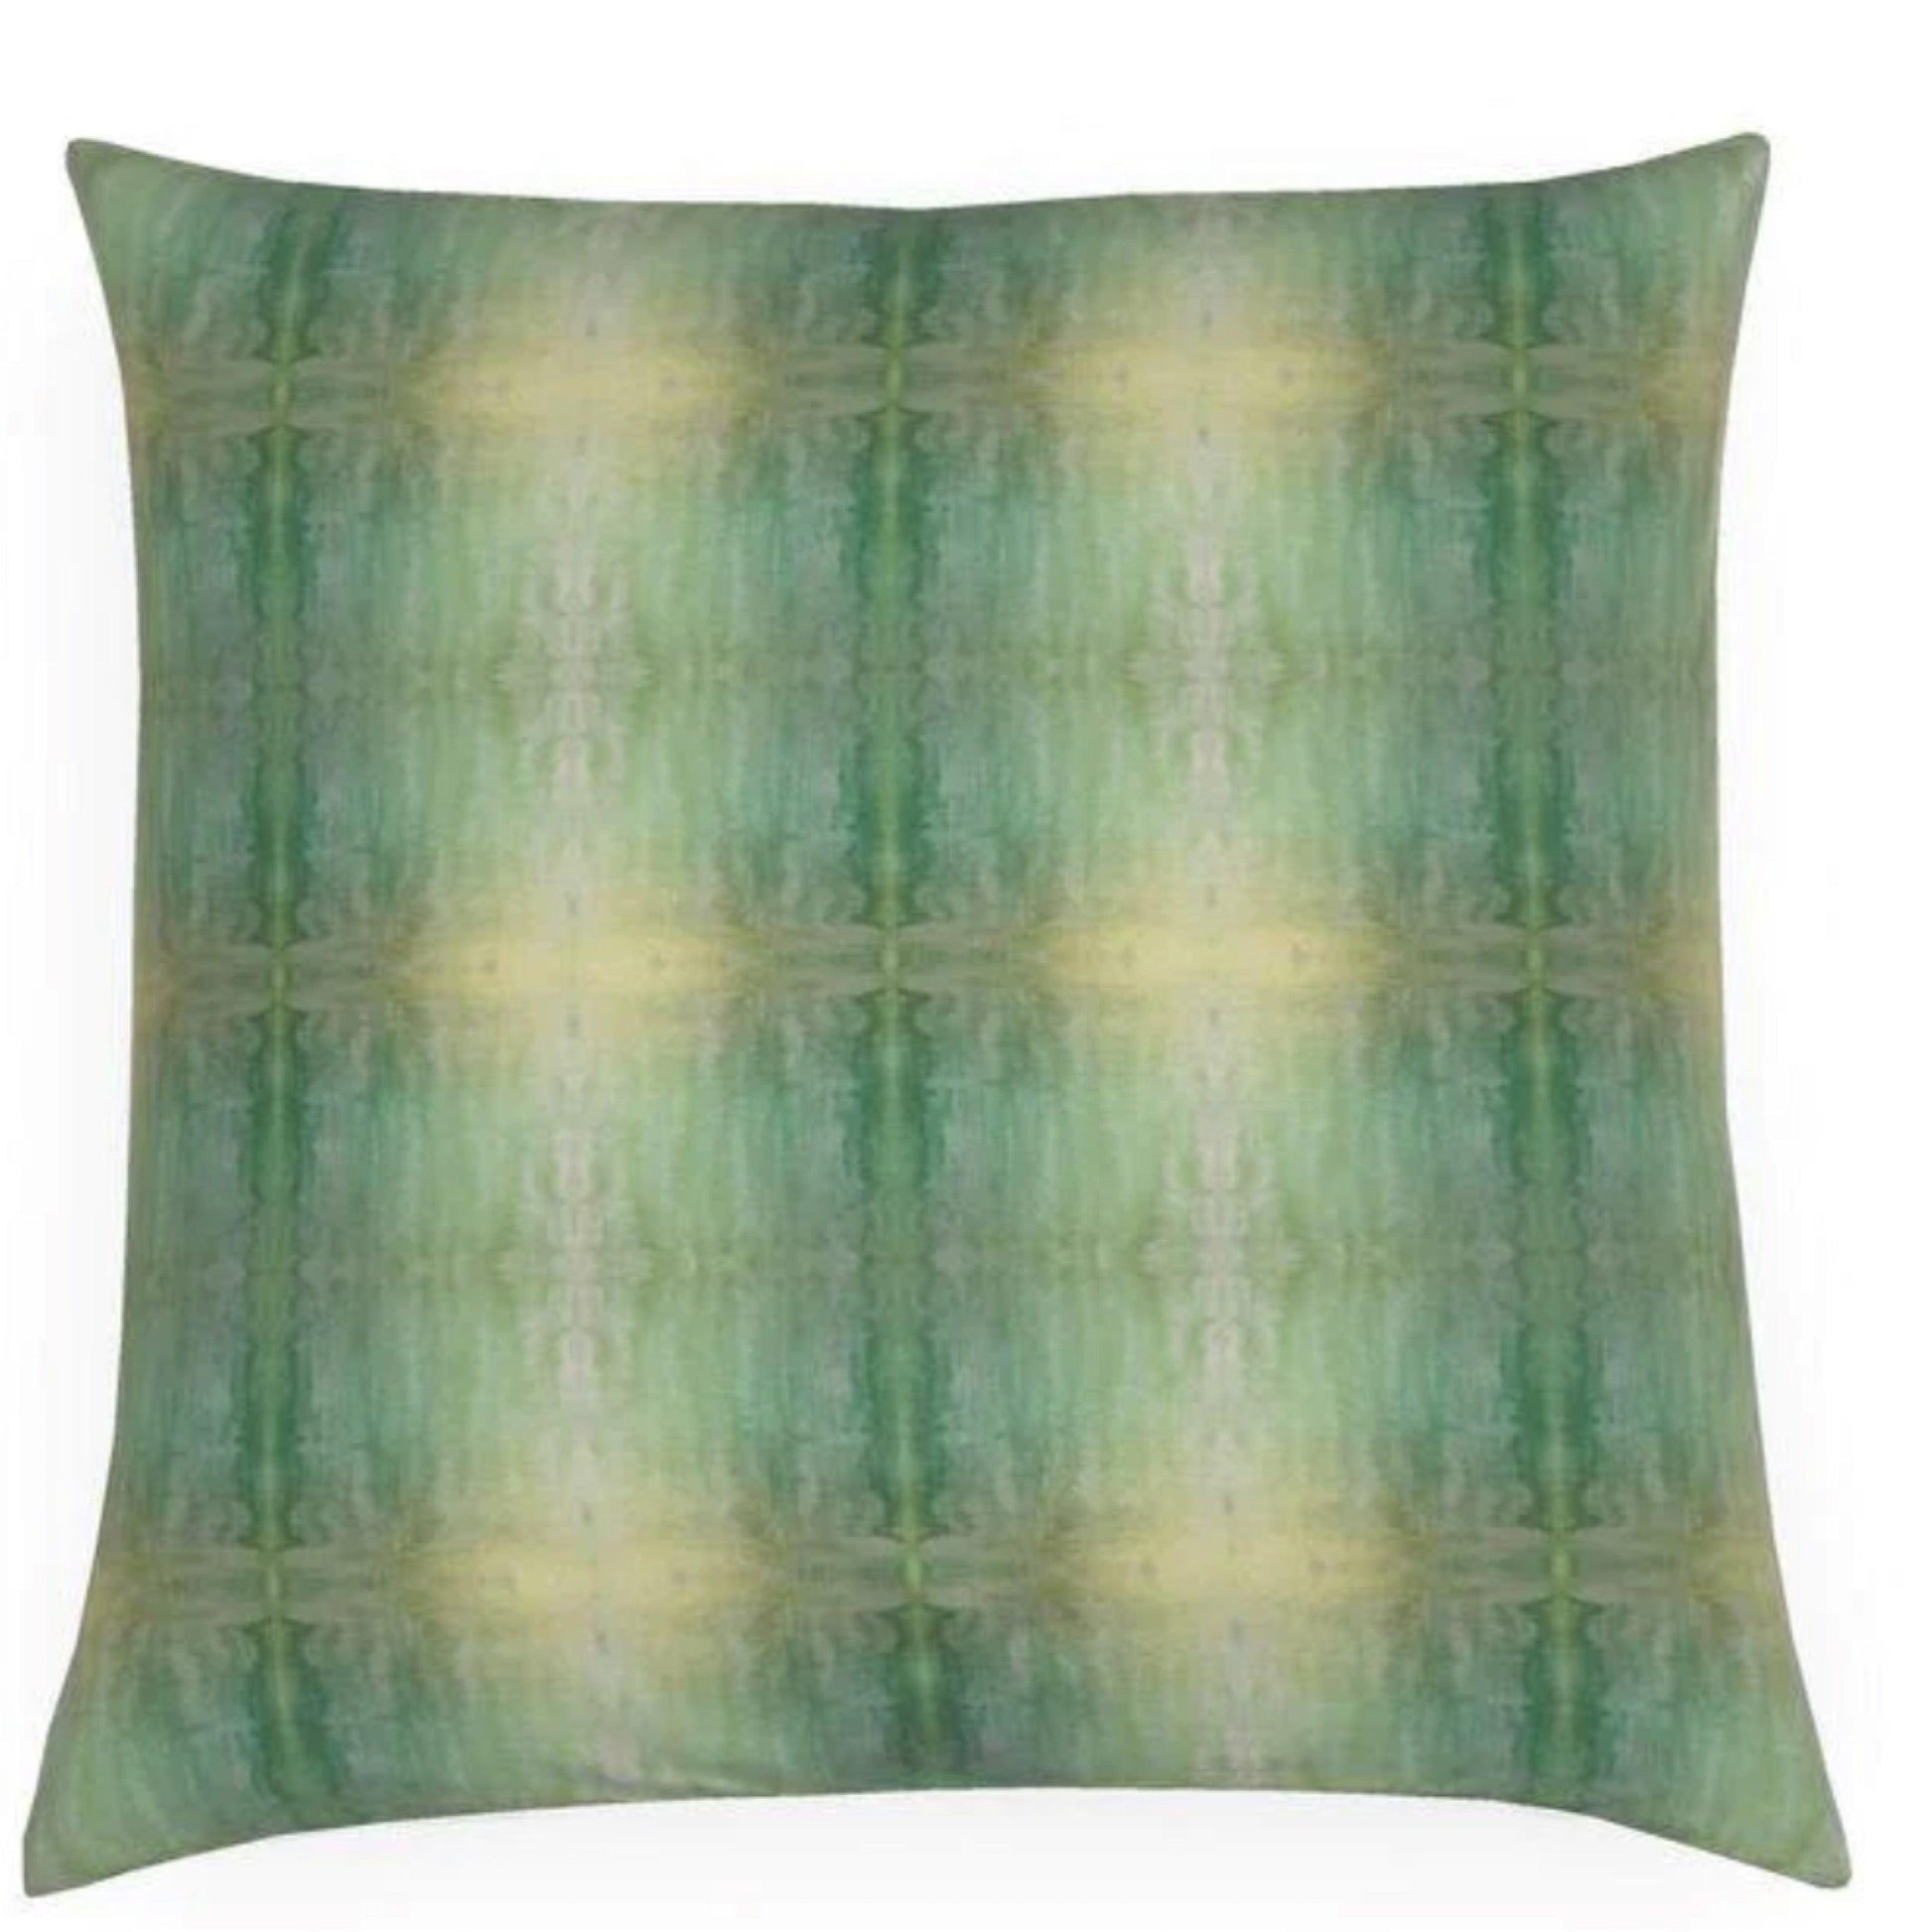 Springy Plaid Luxury Decorative Throw Pillow 24" x 24" - The White Barn Antiques